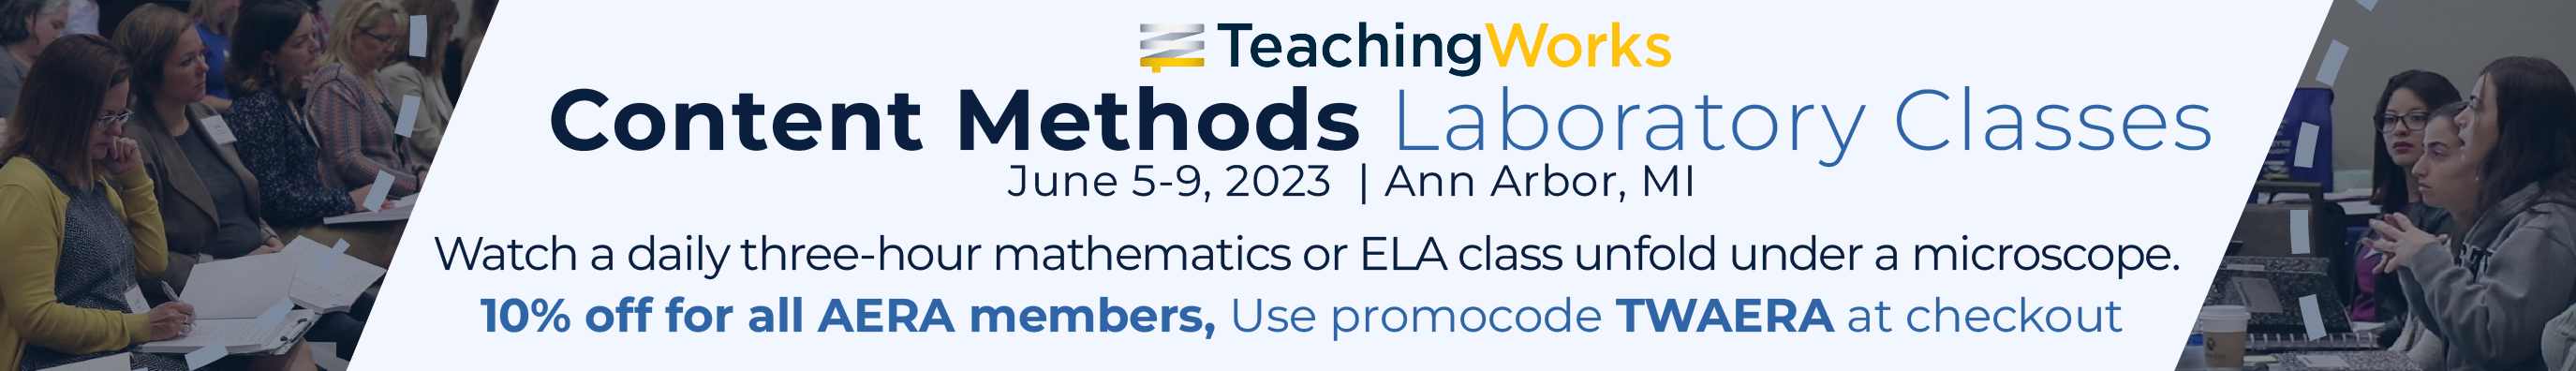 TeachingWorks Content Methods Laboratory Classes, June 5–9, 2023, Ann Arbor, MI | Watch a daily three-hour mathematics or ELA class unfold under a microscope. 10% off for all AERA members, use promocode TWAERA at checkout